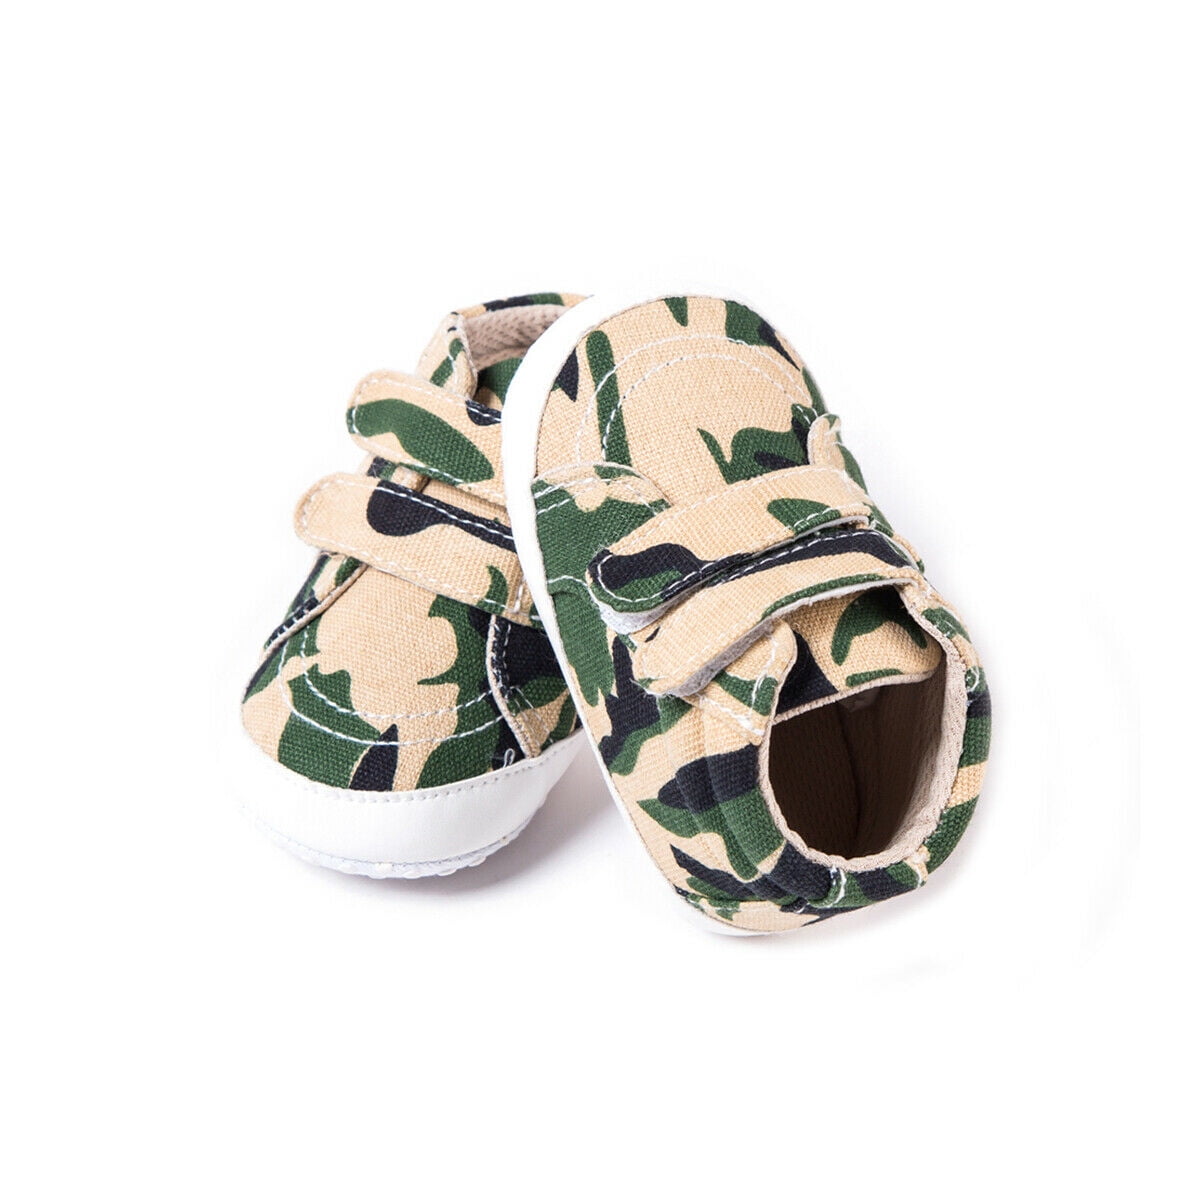 Tetyseysh - Baby Casual Breathable Shoes Camouflage Pattern Prewalker ...